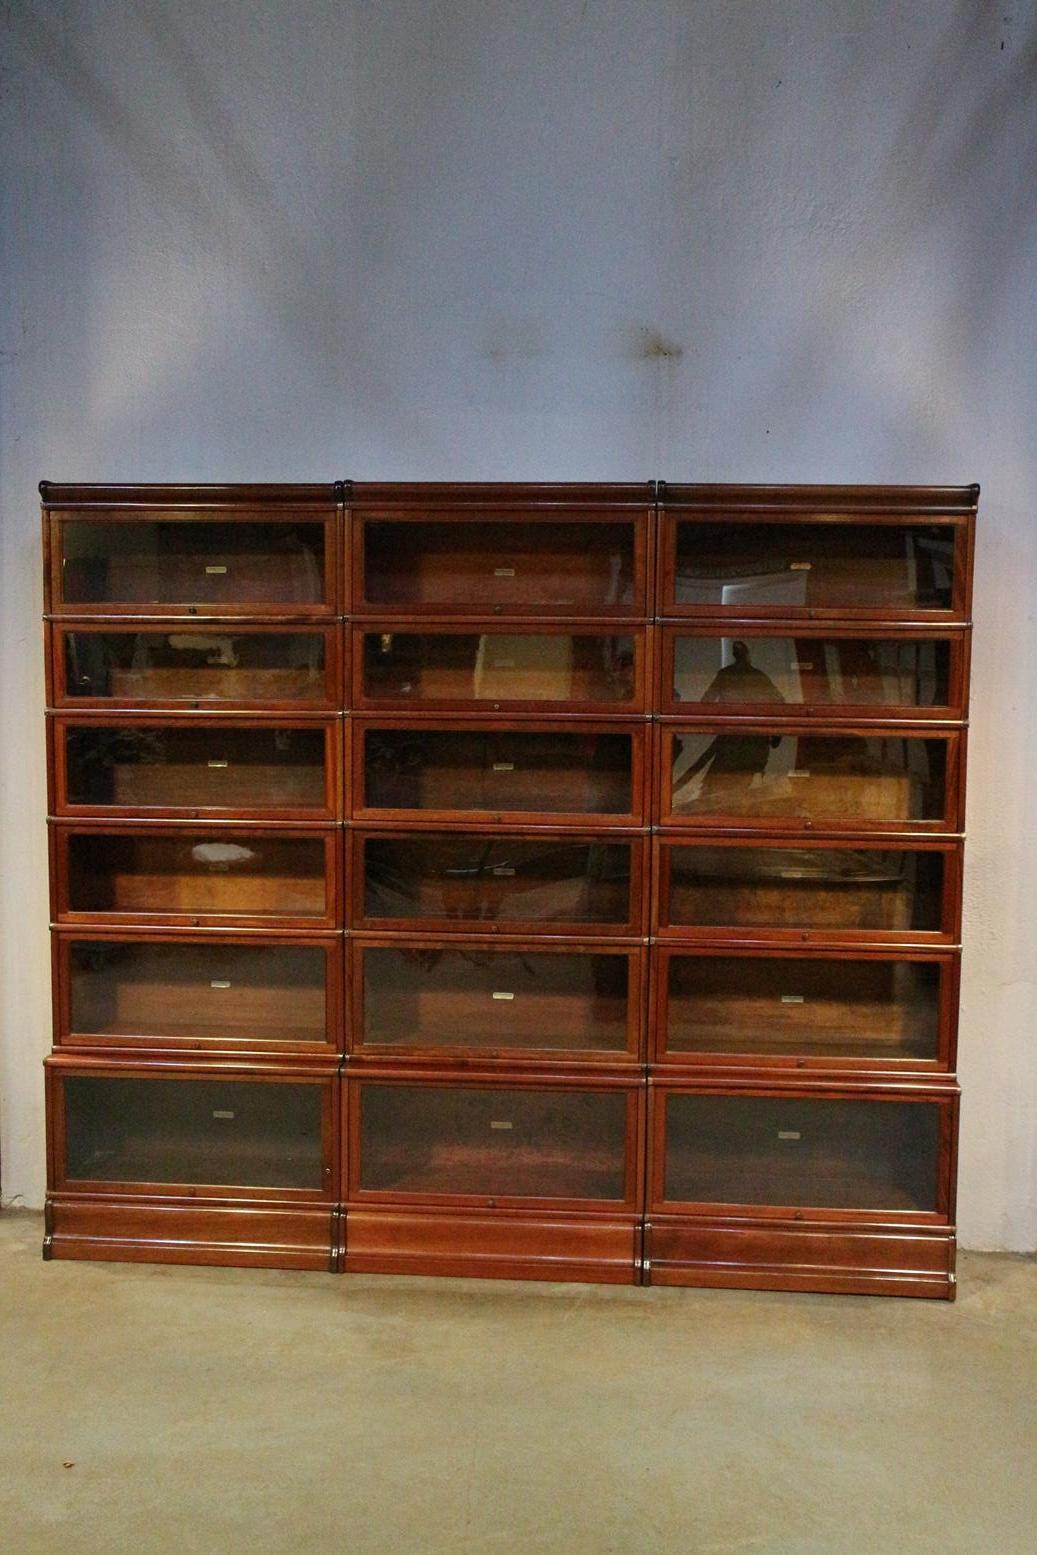 Large antique mahogany Globe Wernicke bookcase. Consisting of 18 stackable parts. Entirely in perfect condition. The lower parts are deep parts which are suitable for large books or binders. Nice warm color. Impressive bookcase.
Origin: